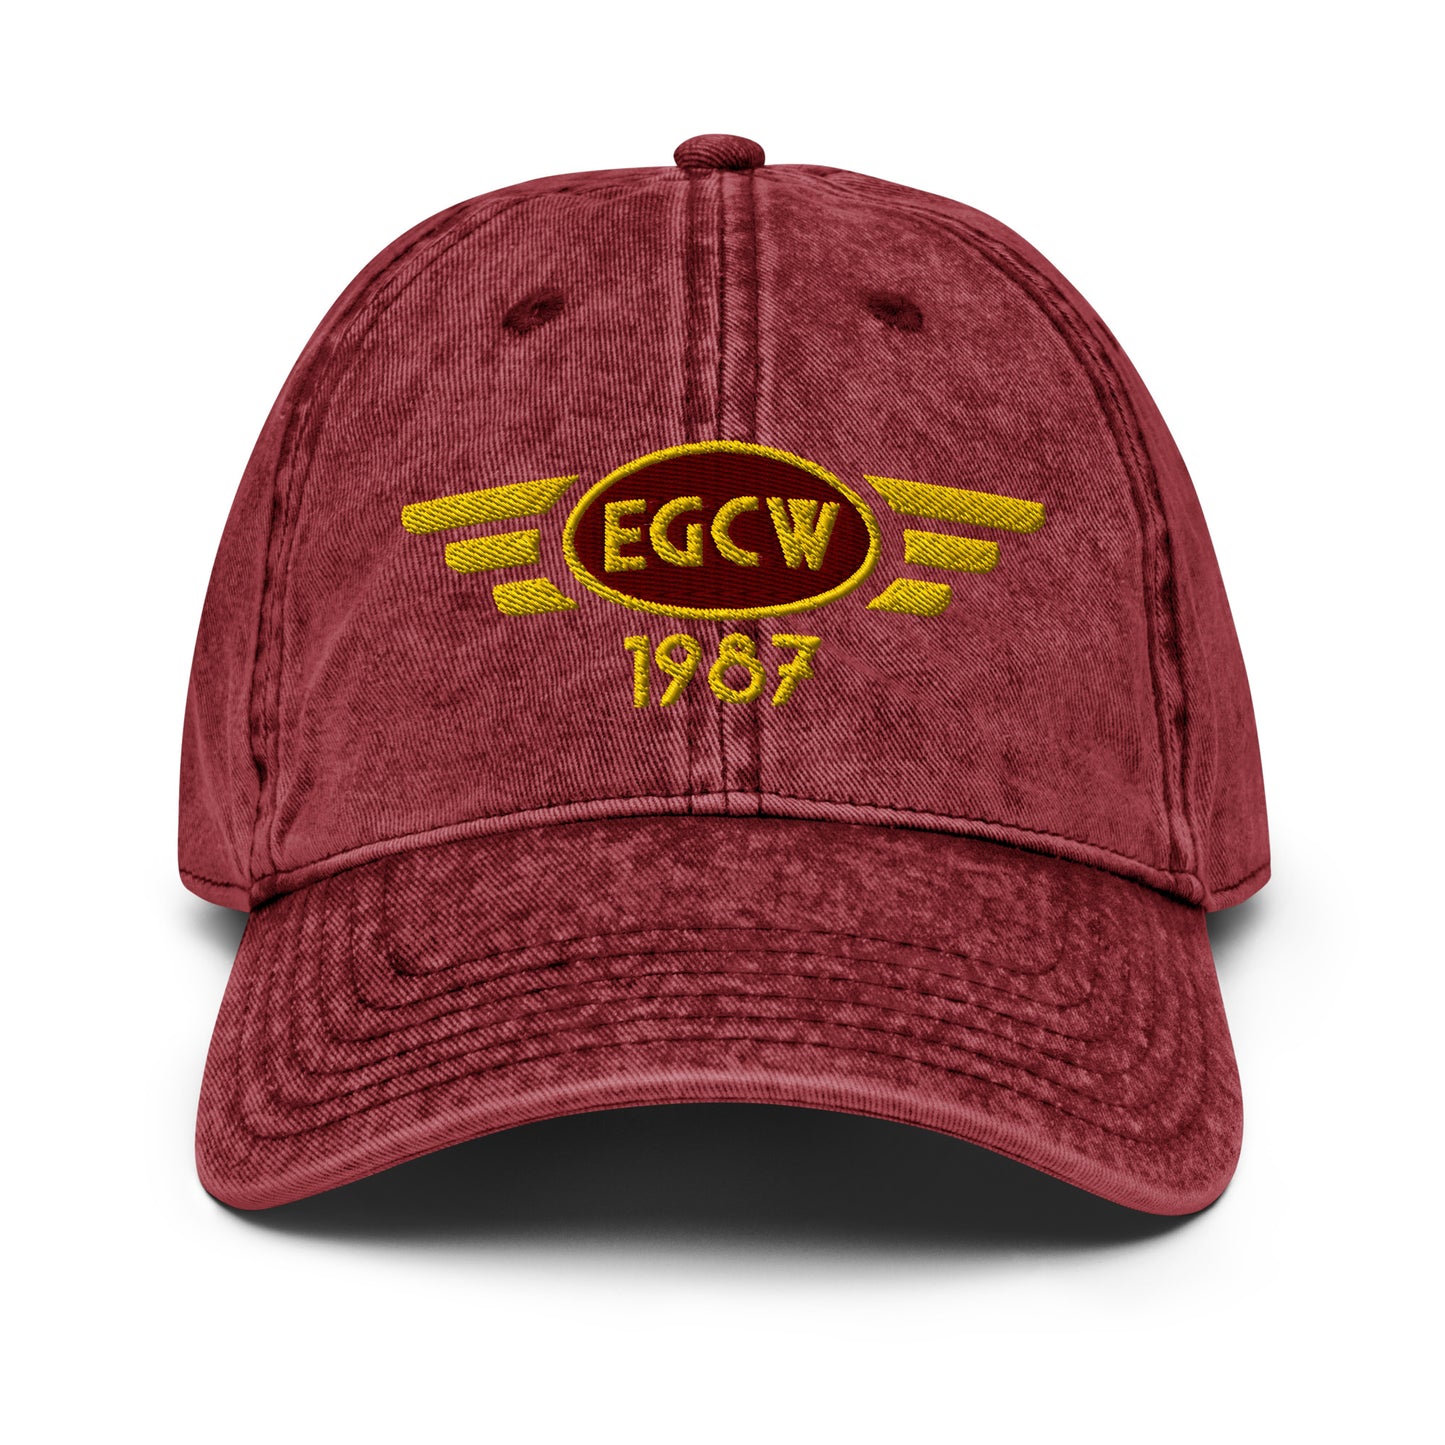 Burgundy coloured cotton twill baseball cap with embroidered vintage style aviation logo for Welshpool Airport.